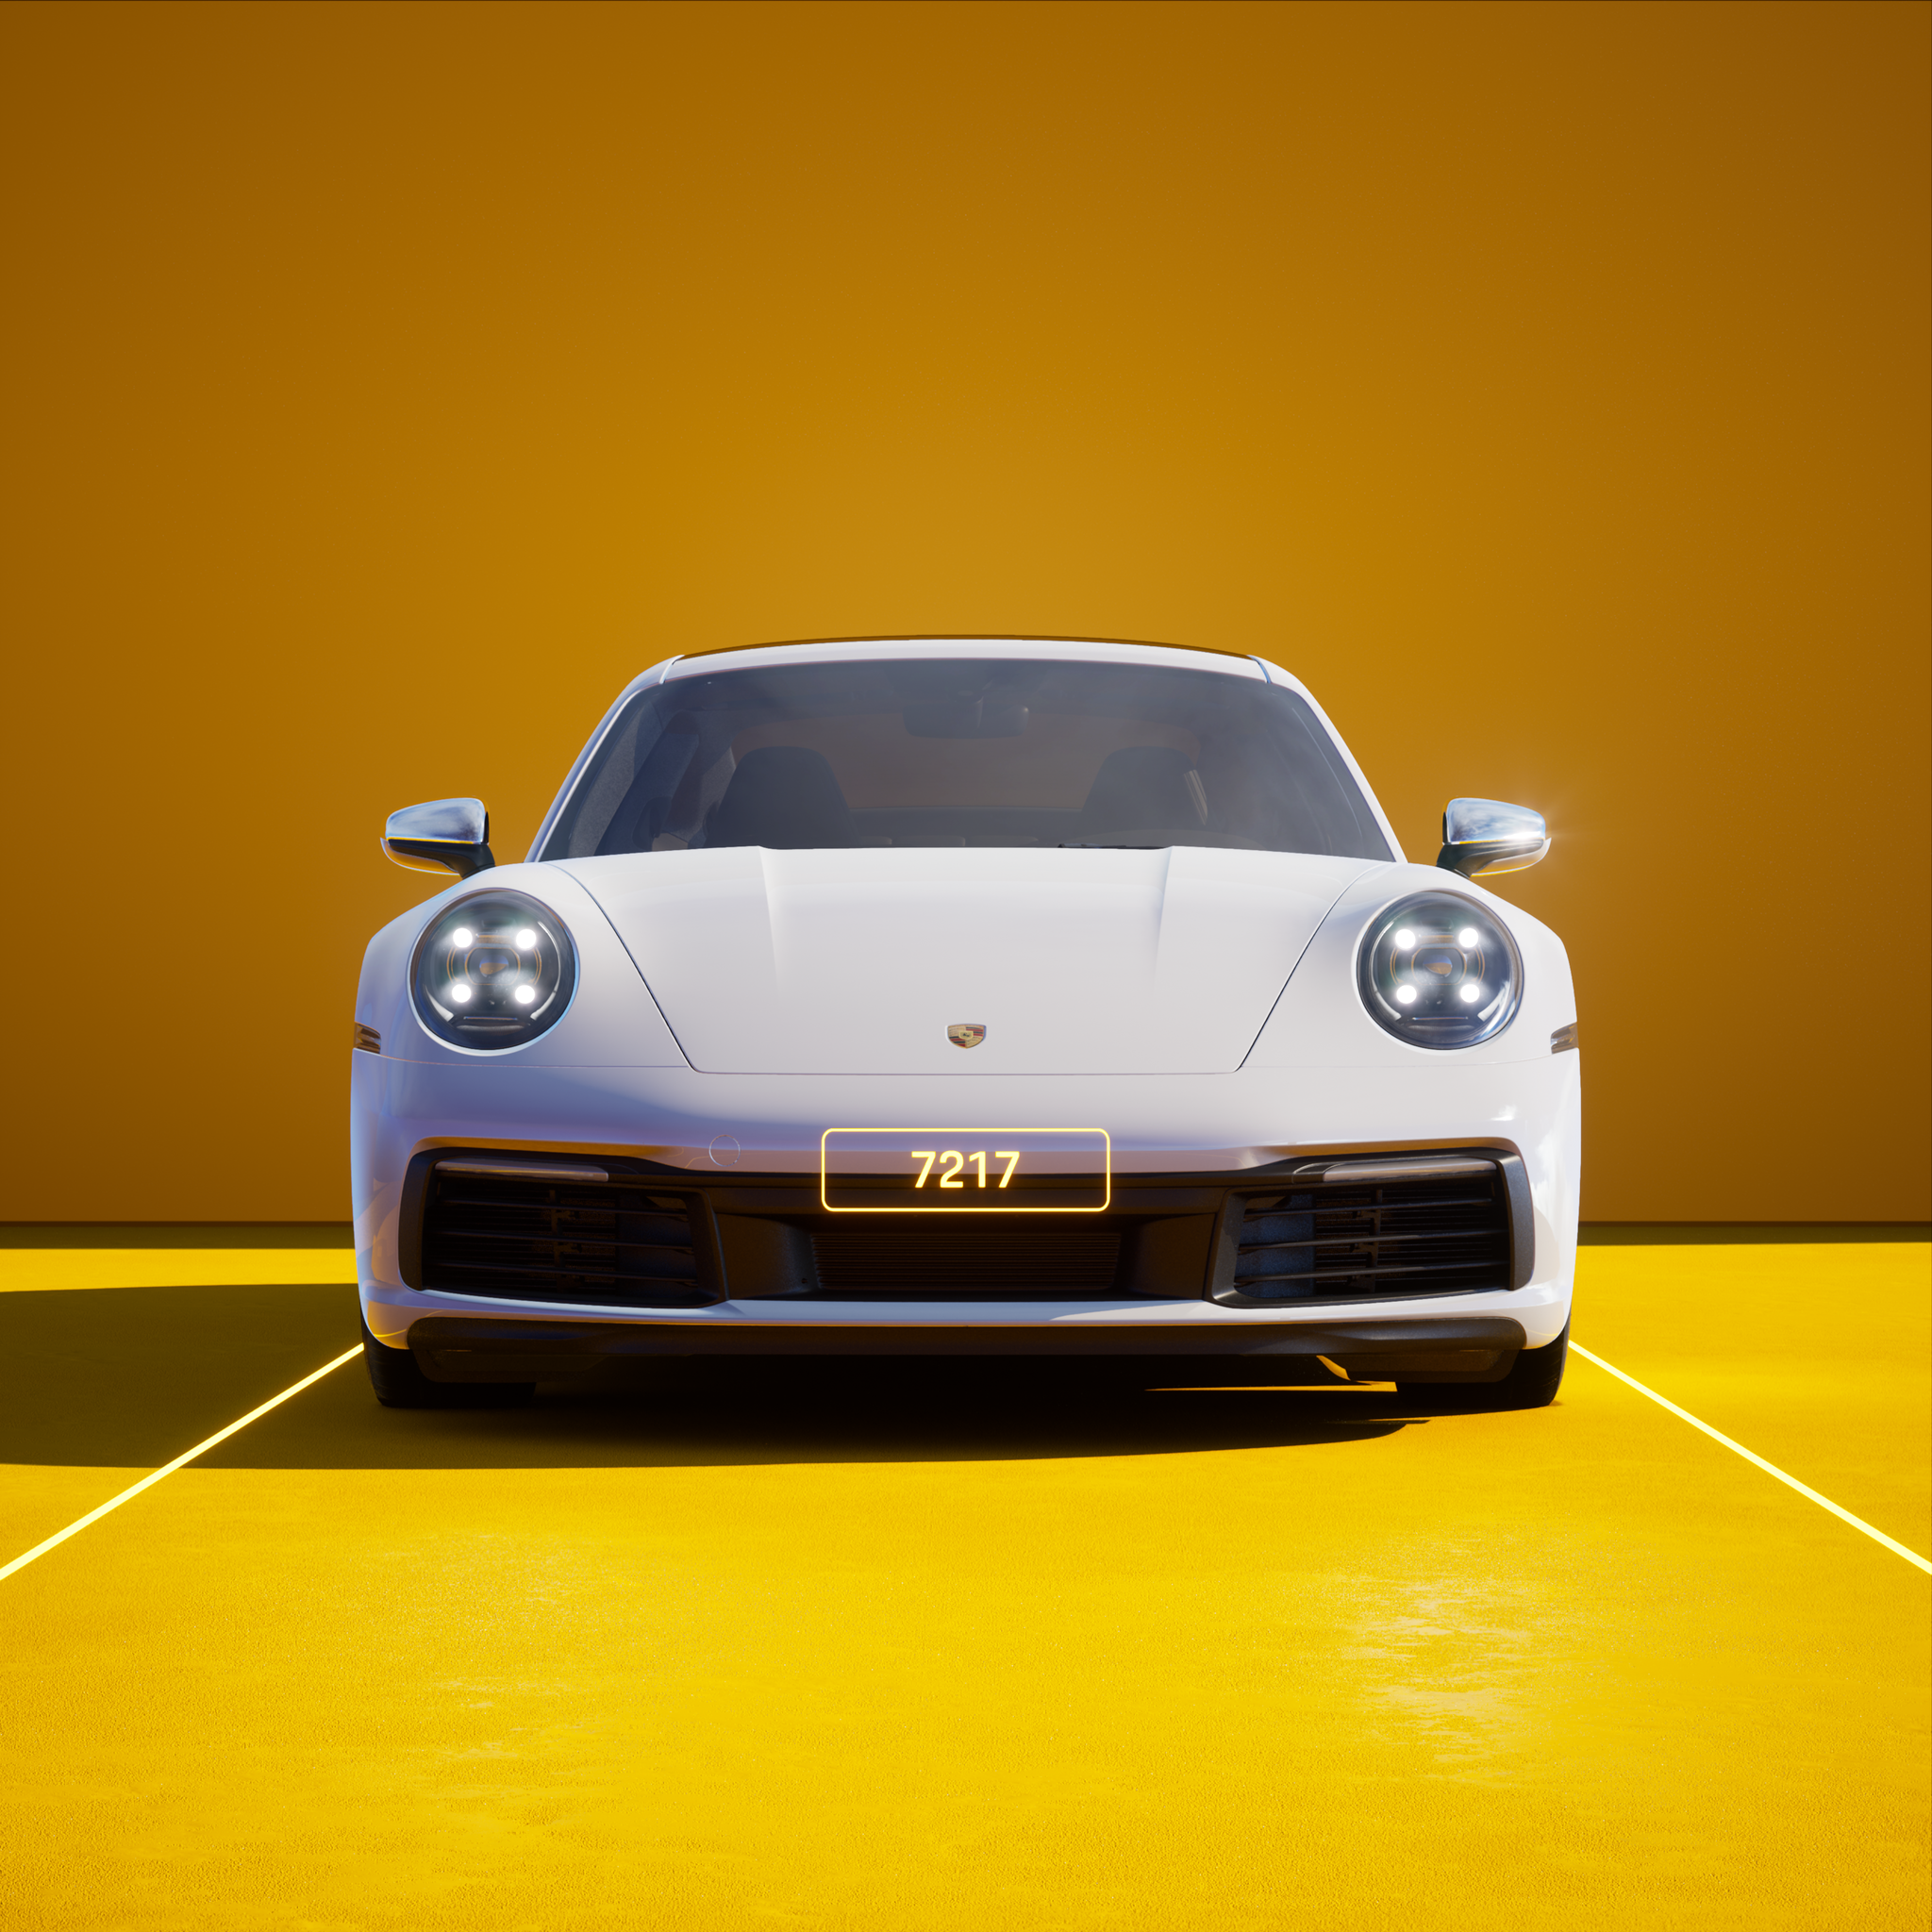 The PORSCHΞ 911 7217 image in phase